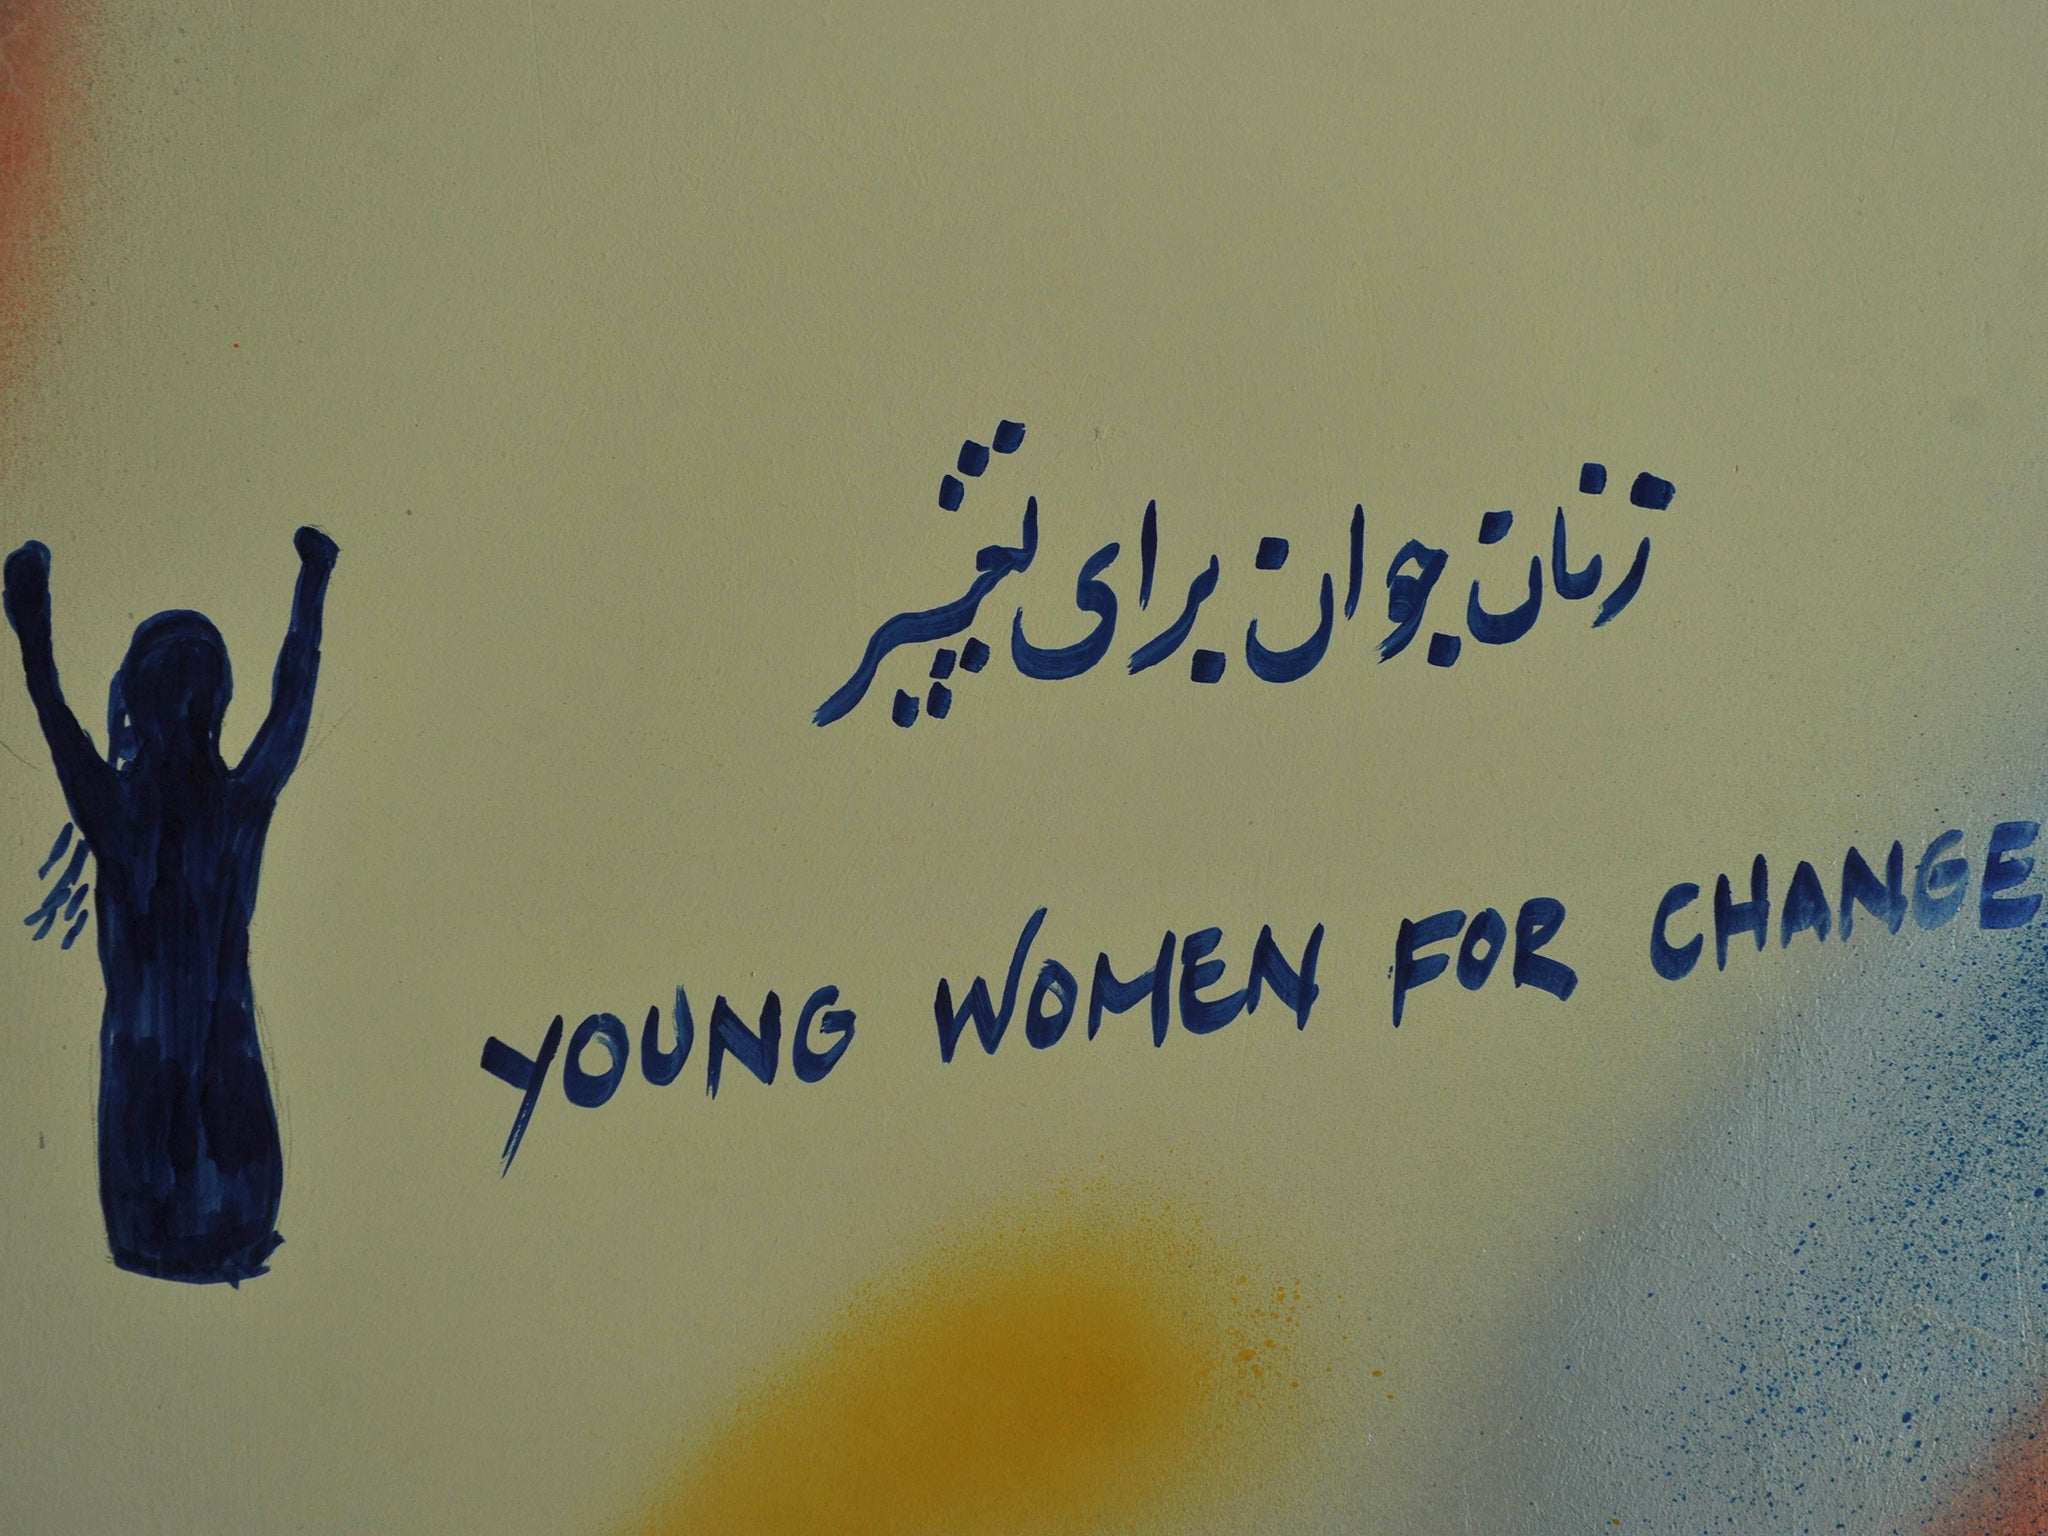 A handwritten message on the wall of the Young Women For Change internet cafe